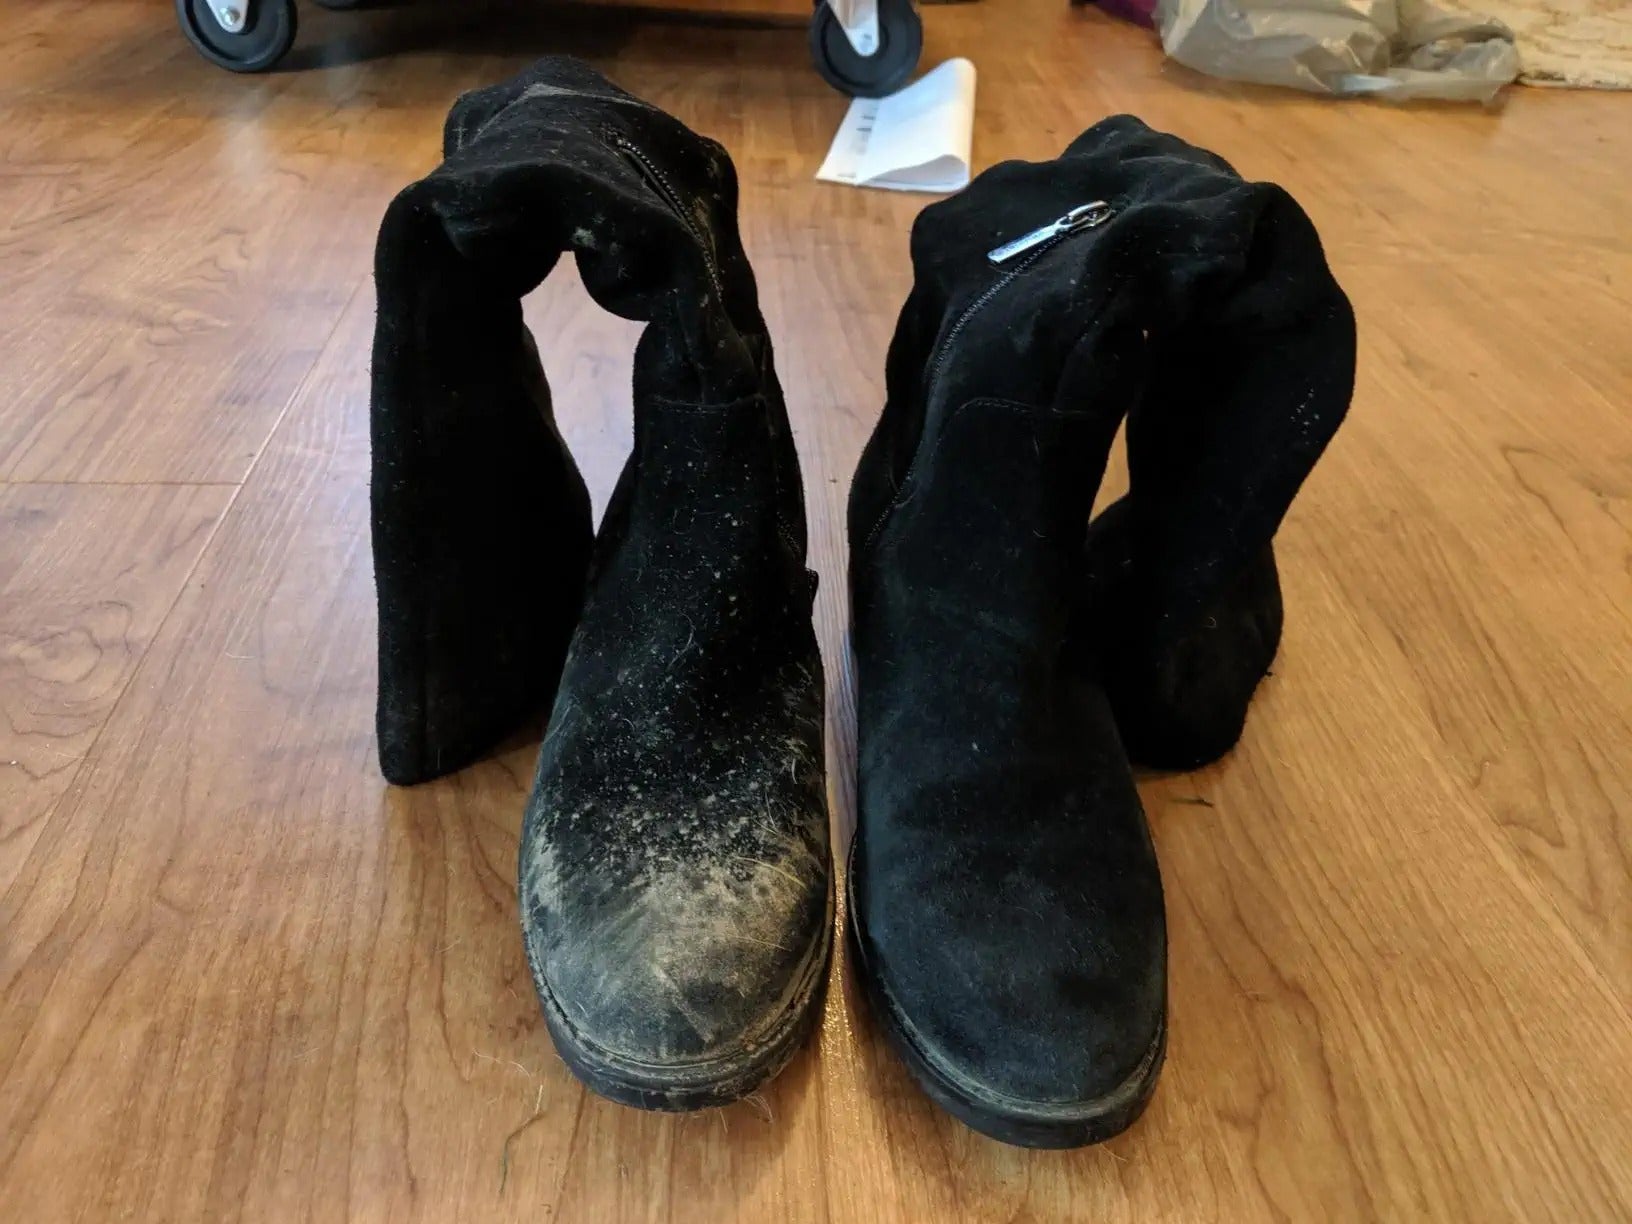 two suede boots, one covered in mud and one clean